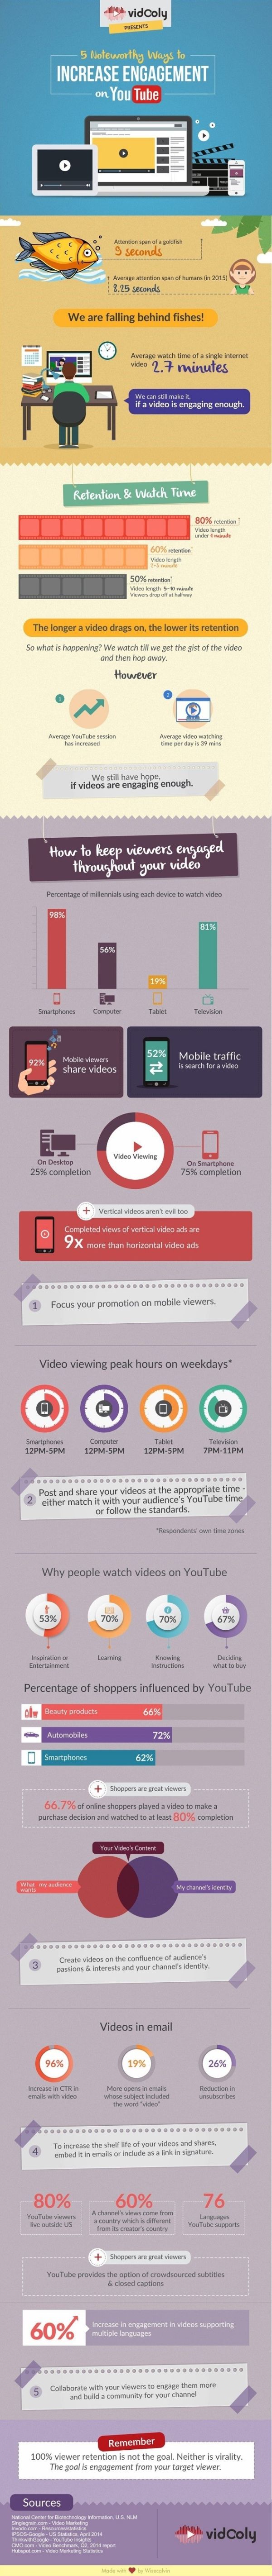 Boost_YouTube_Engagement_Infographic